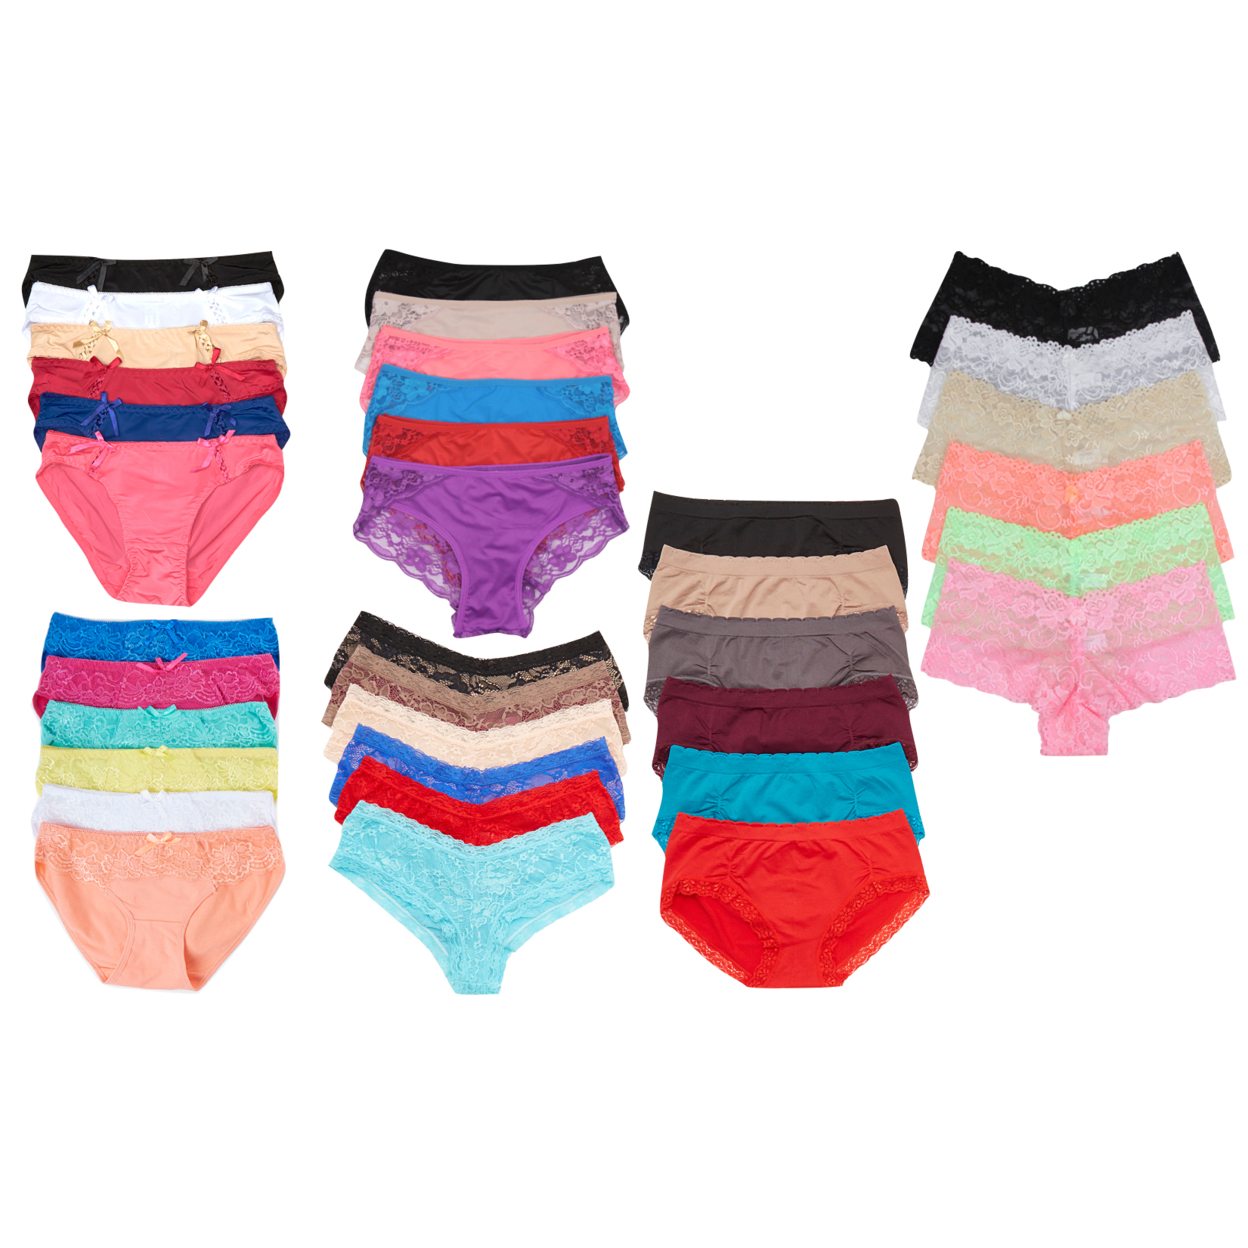 6 Pack Of Bikini Brief Panty Mystery Deal - Large